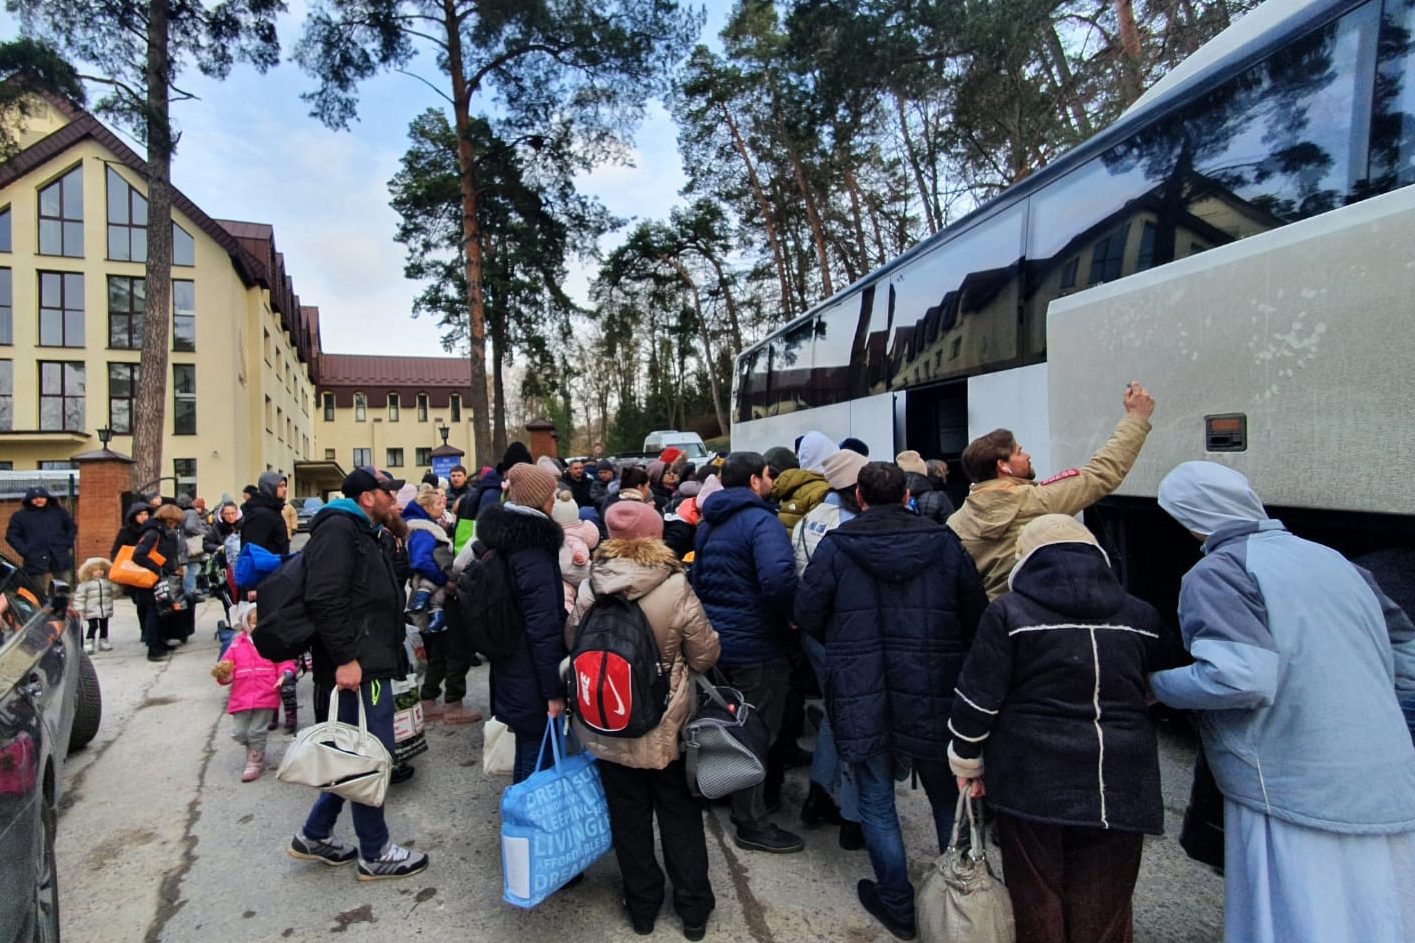 Ukrainian refugees arriving at the retreat house in Lviv on their way to Poland.